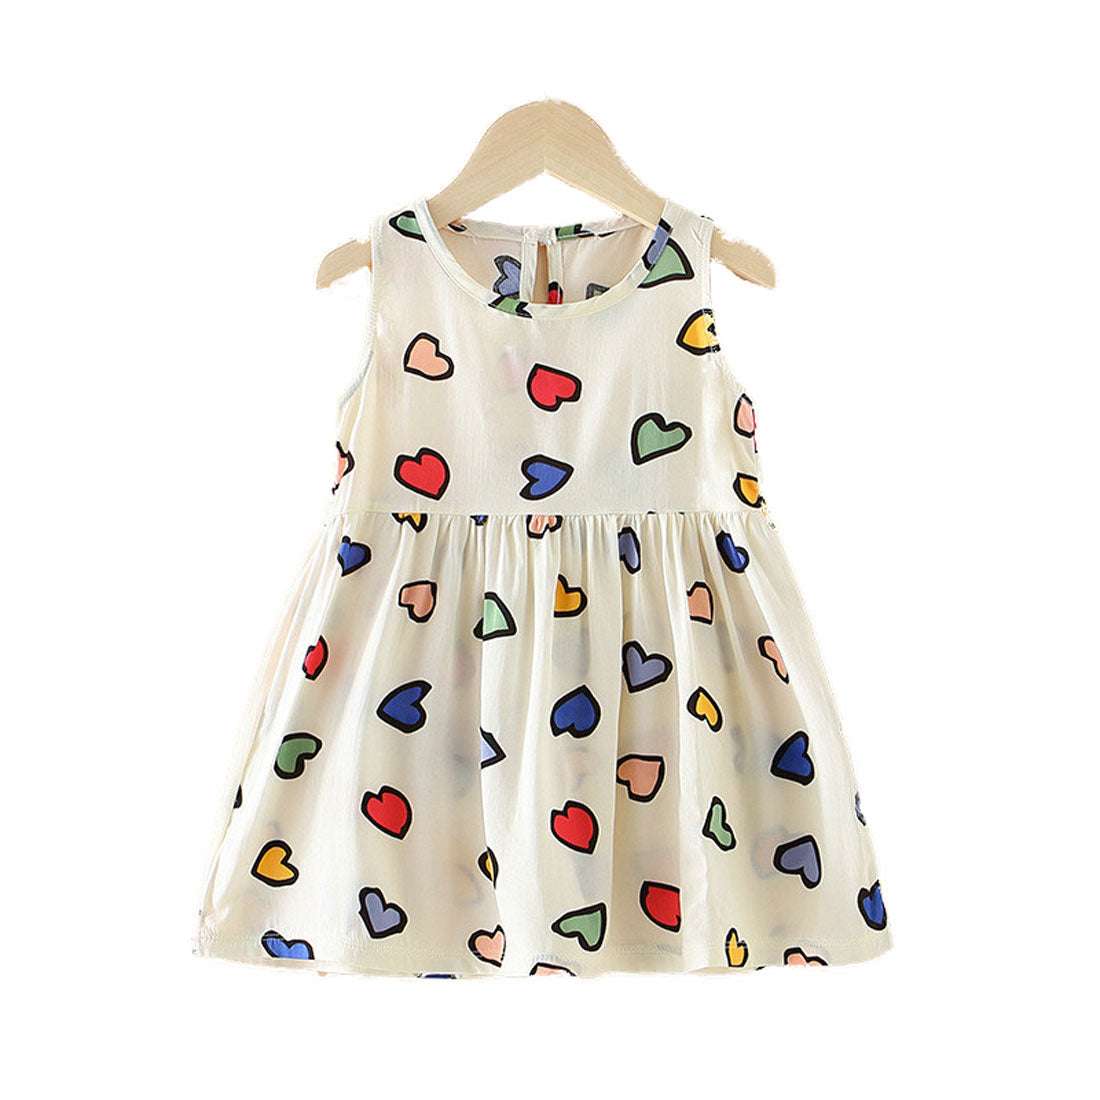 Baby Dresses, Stylish Girls' Skirts, Vest Skirts - available at Sparq Mart